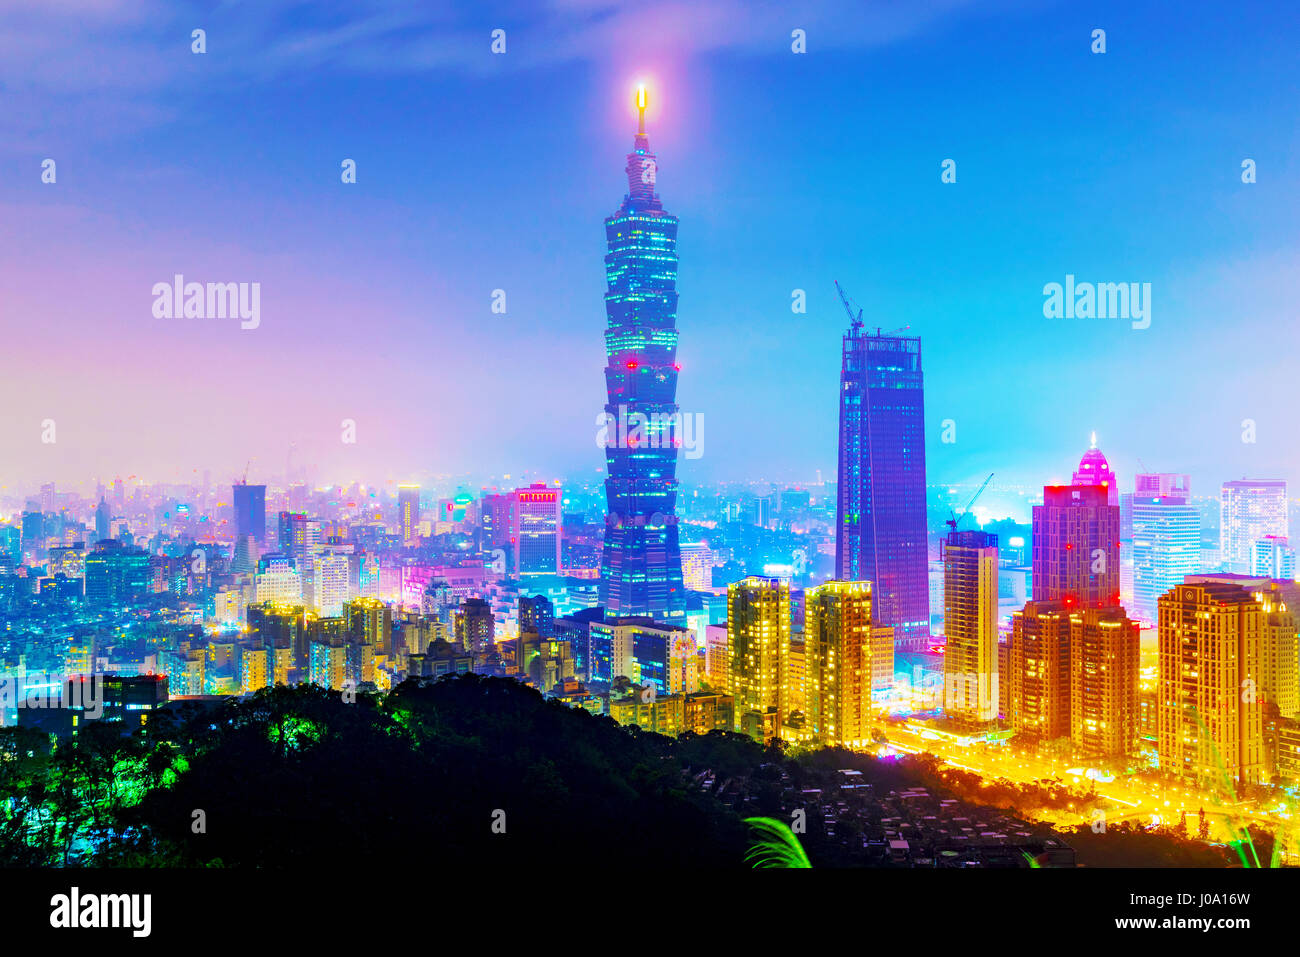 TAIPEI, TAIWAN - MARCH 20: This is a view of the Taipei 101 building and Xinyi financial district taken from Elephant mountain at night on March 20, 2 Stock Photo